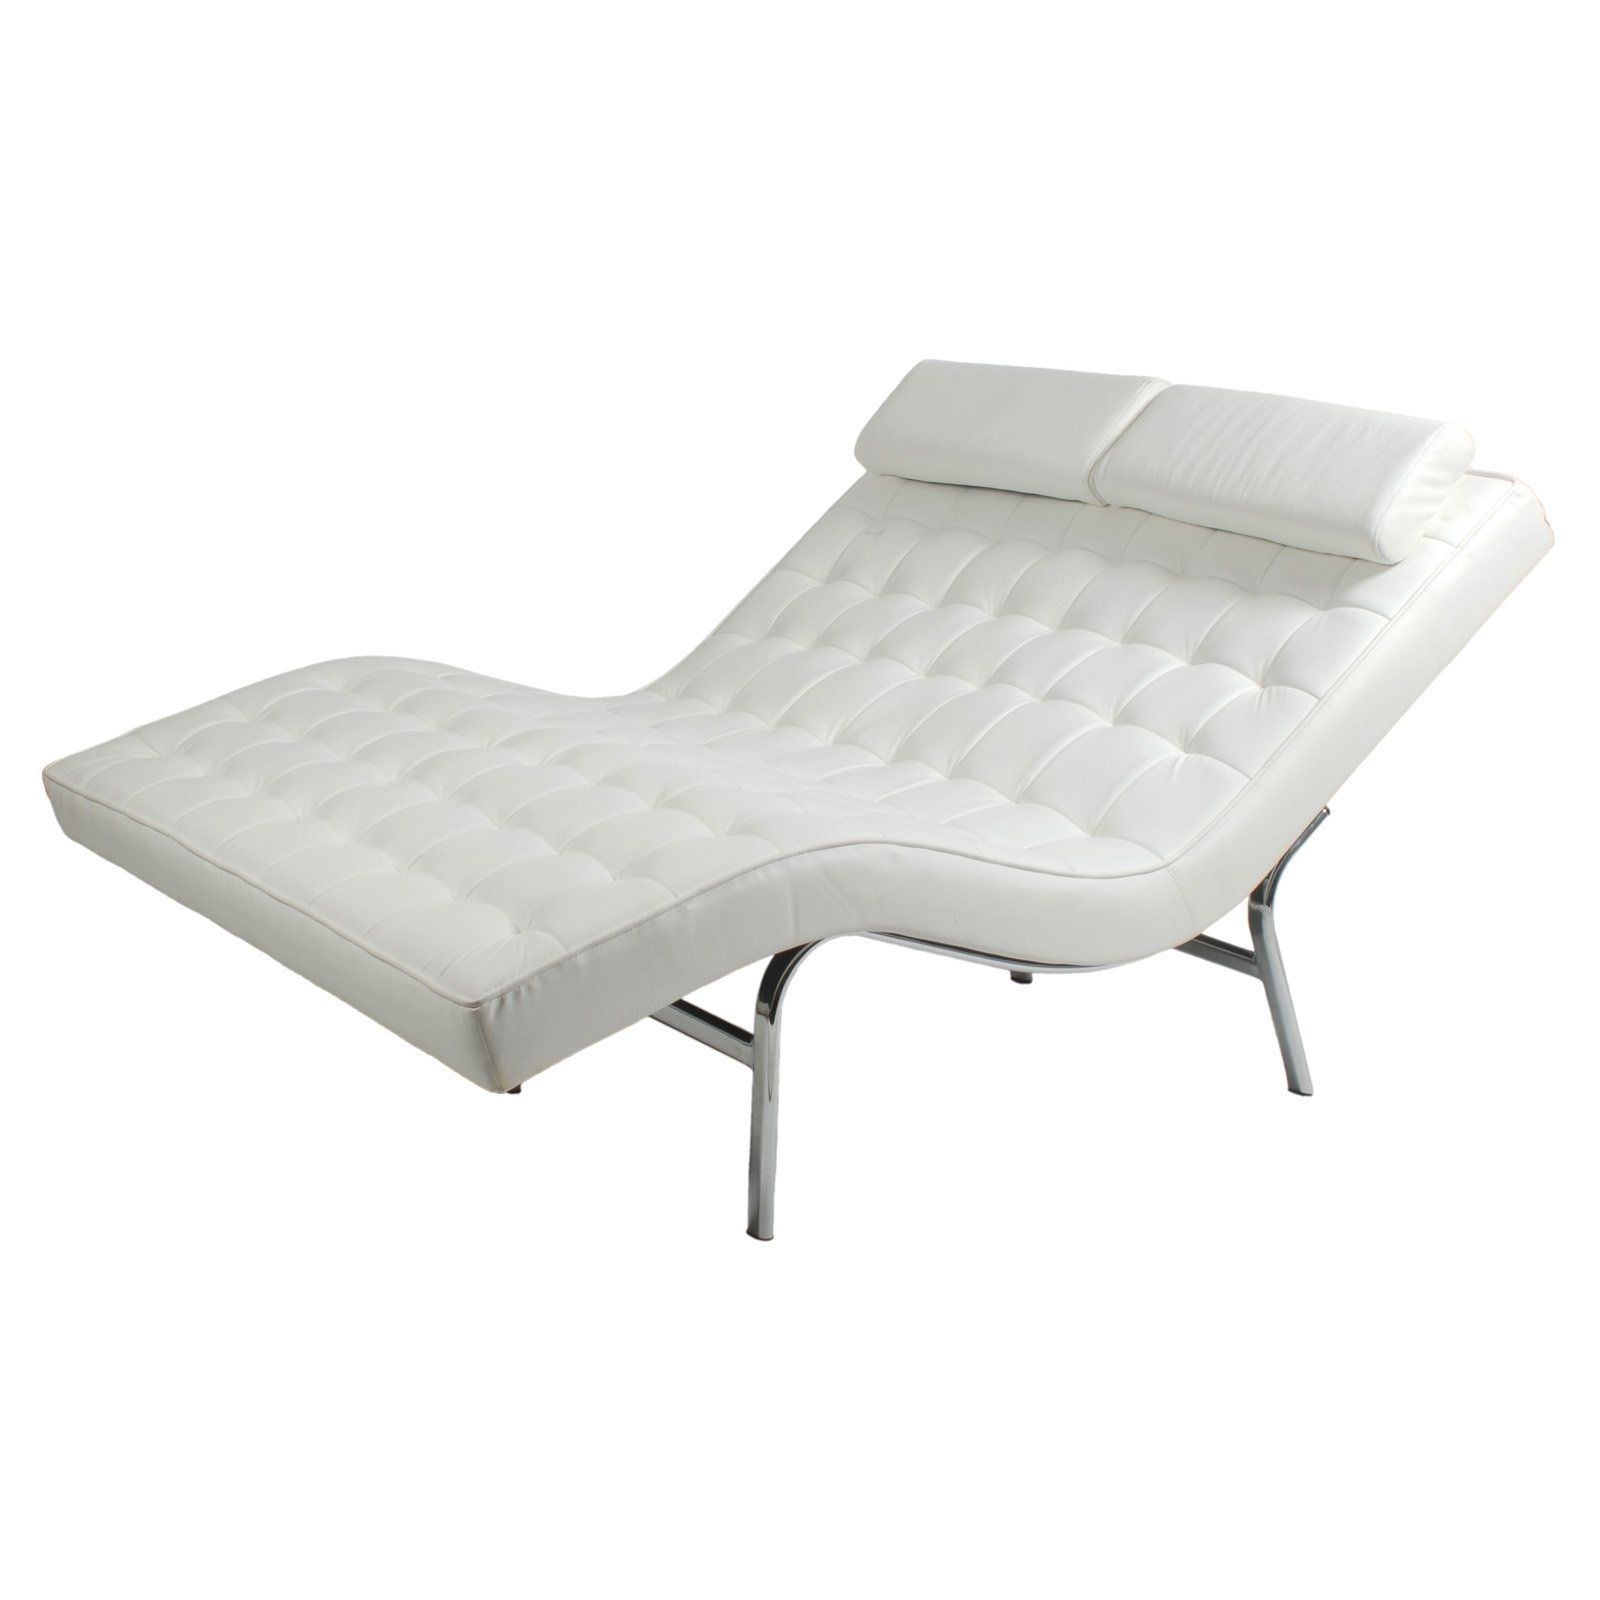 Preferred Fresh Chaise Lounge For Sale In Uk #17313 Within Futon Chaise Lounges (View 15 of 15)